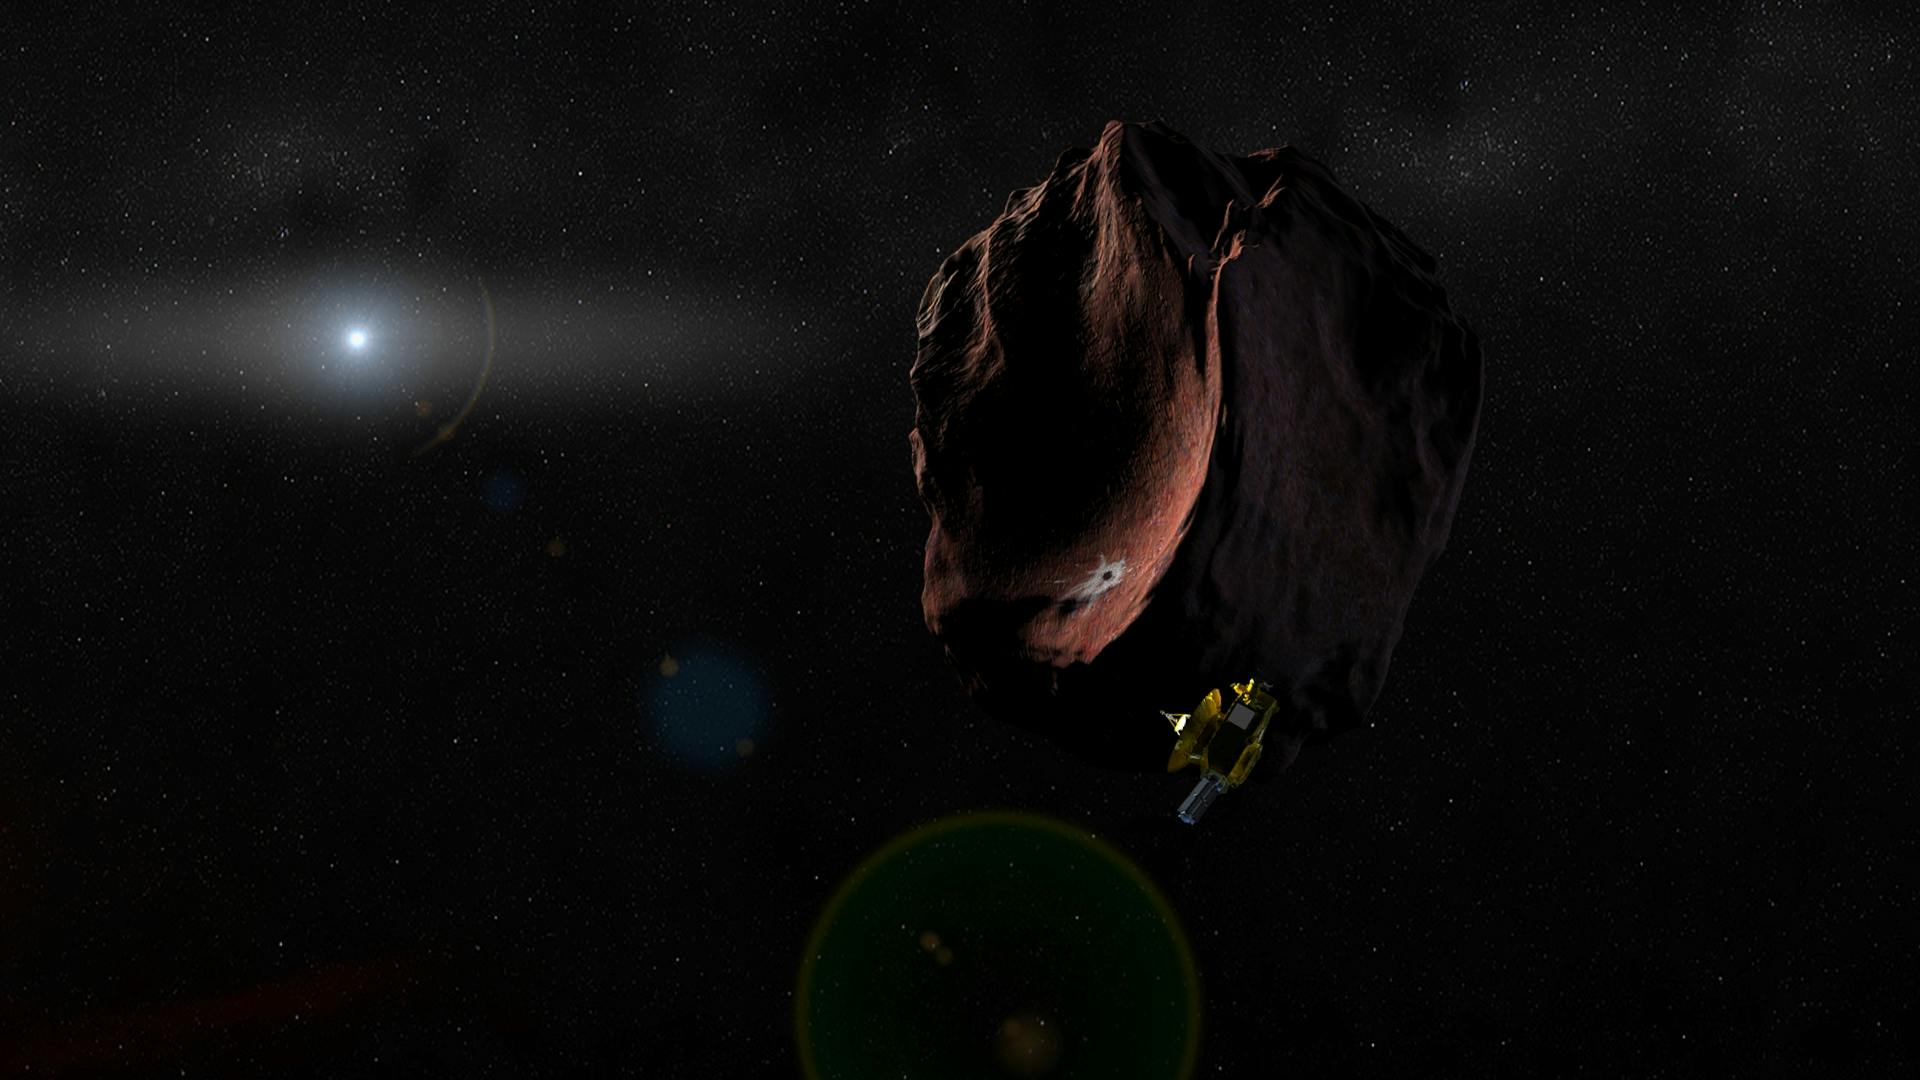 Artist's impression of NASA's New Horizons spacecraft encountering a Pluto-like object in the distant Kuiper Belt. (Credit: NASA/Johns Hopkins University Applied Physics Laboratory/Southwest Research Institute/Steve Gribben)